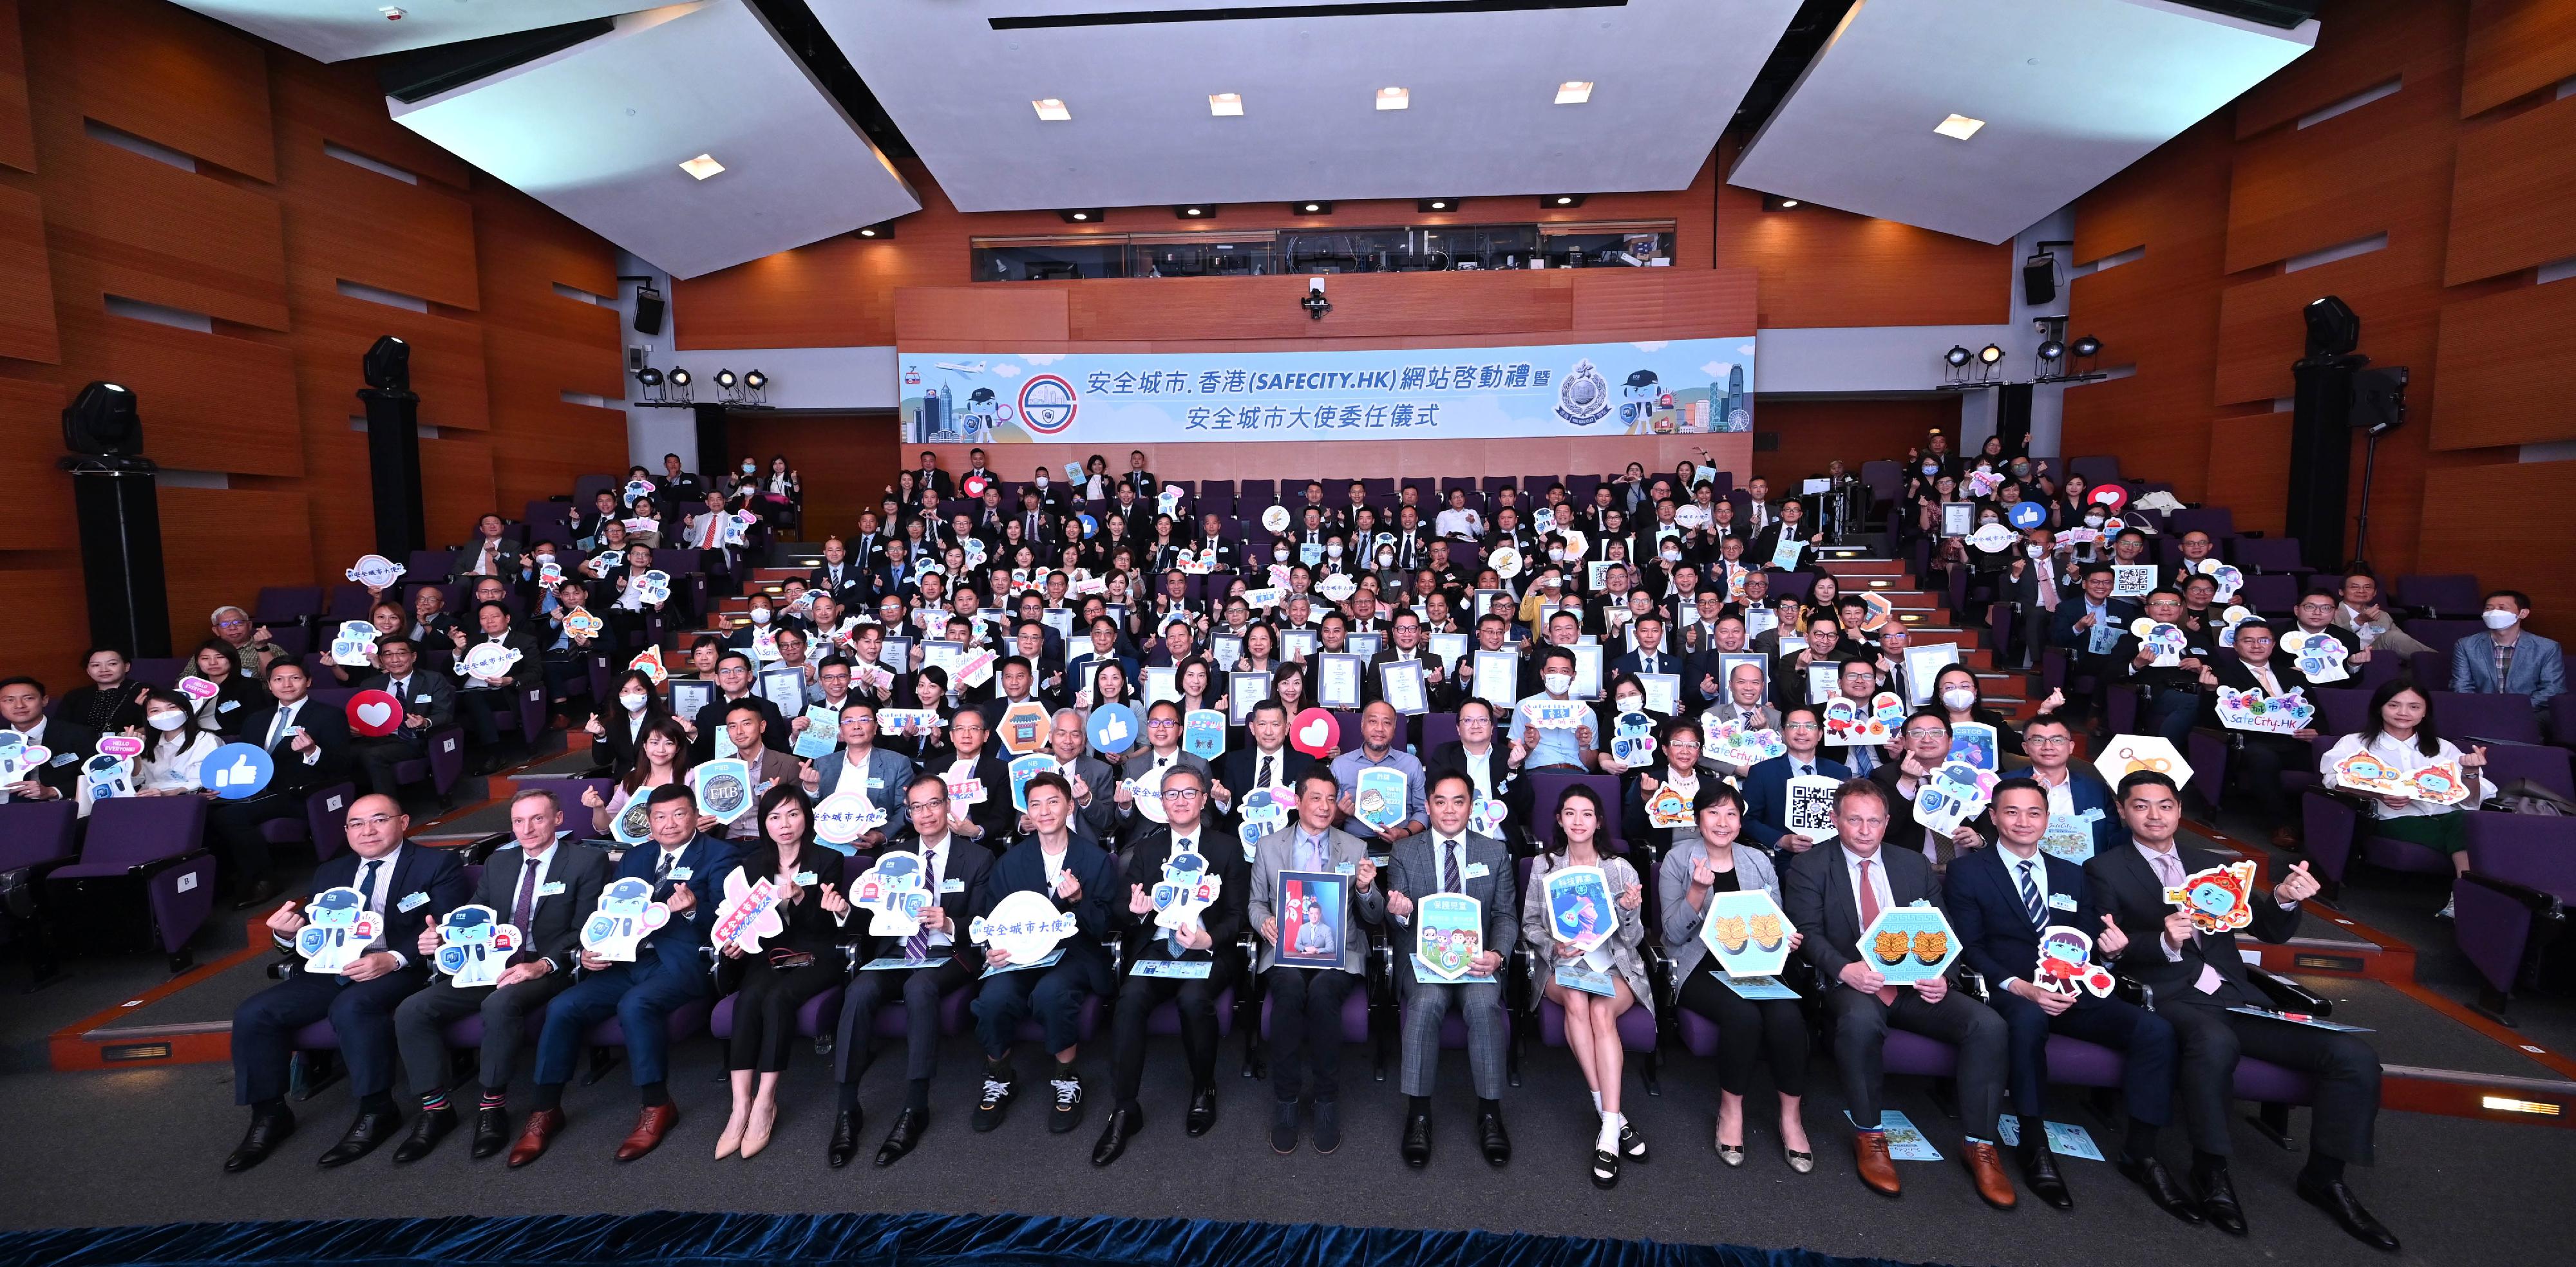 The Police Force today (May 16) launched a brand-new crime prevention website “SafeCity.HK” and appointed 47 “SafeCity Ambassadors”. Photo shows the guests taking a group photo with the “SafeCity Ambassadors” at the launching ceremony.